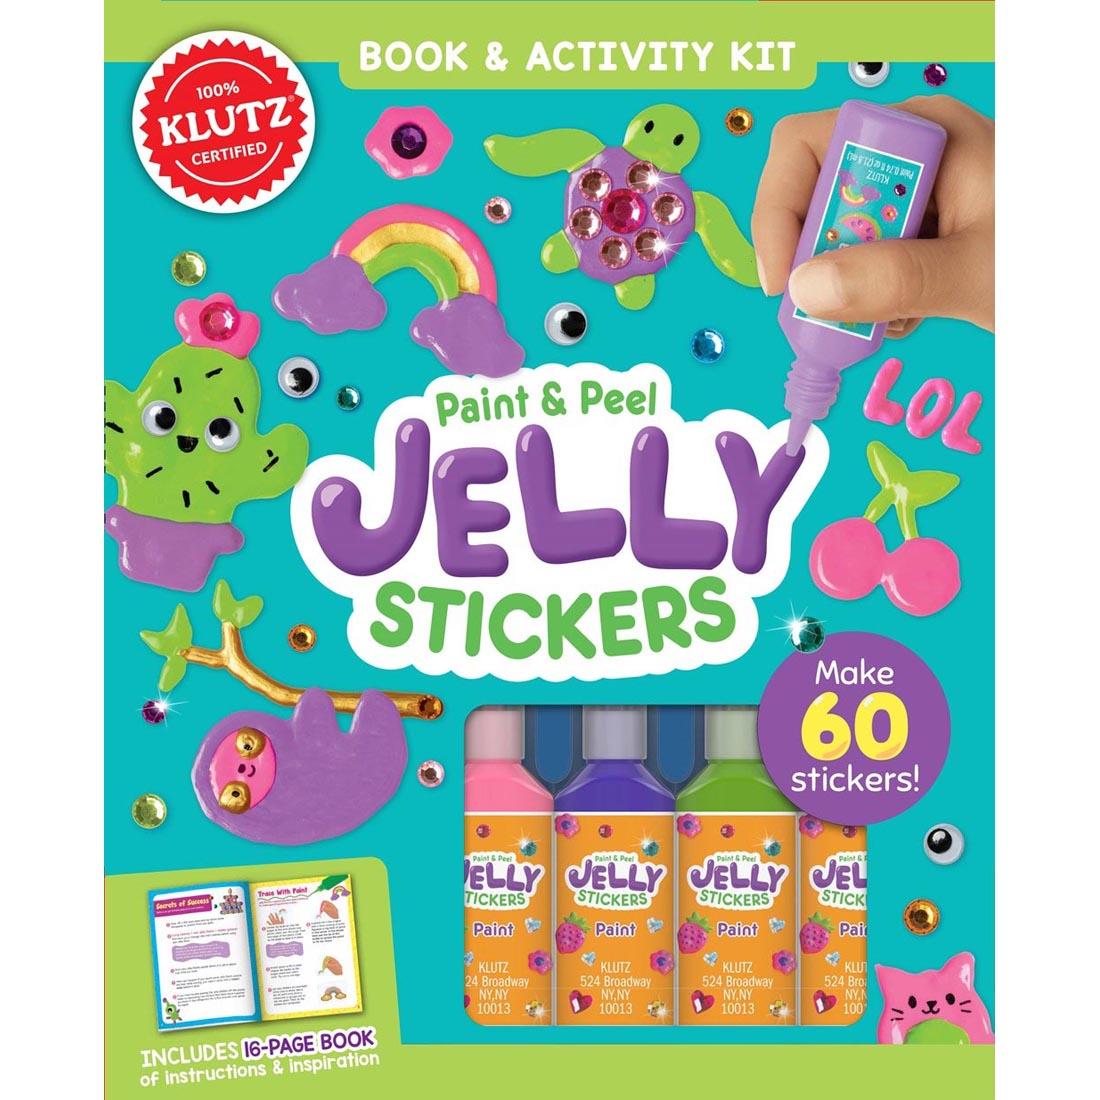 Paint & Peel Jelly Stickers package shows completed projects of a sloth, rainbow, sea turtle and more